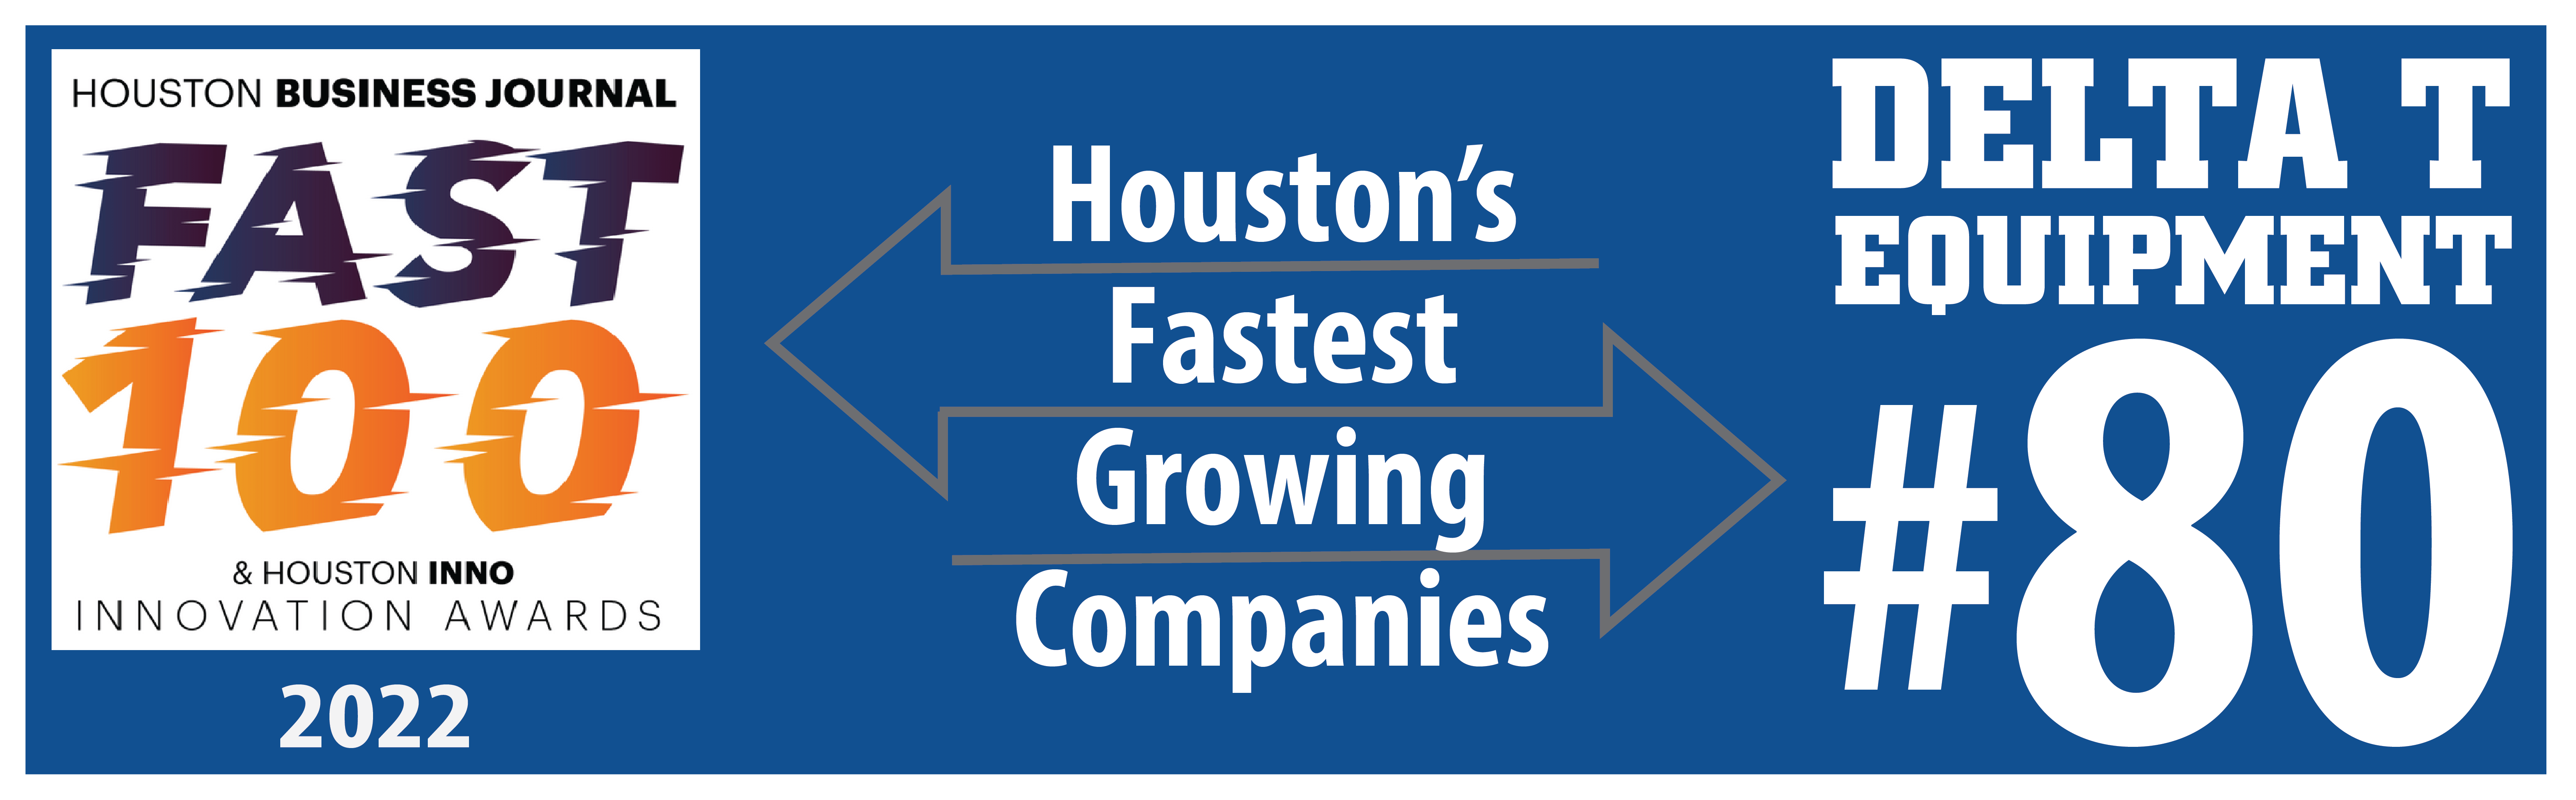 Delta T Equipment Makes Its Fifth Appearance on the Houston Business Journal’s Fast 100 List